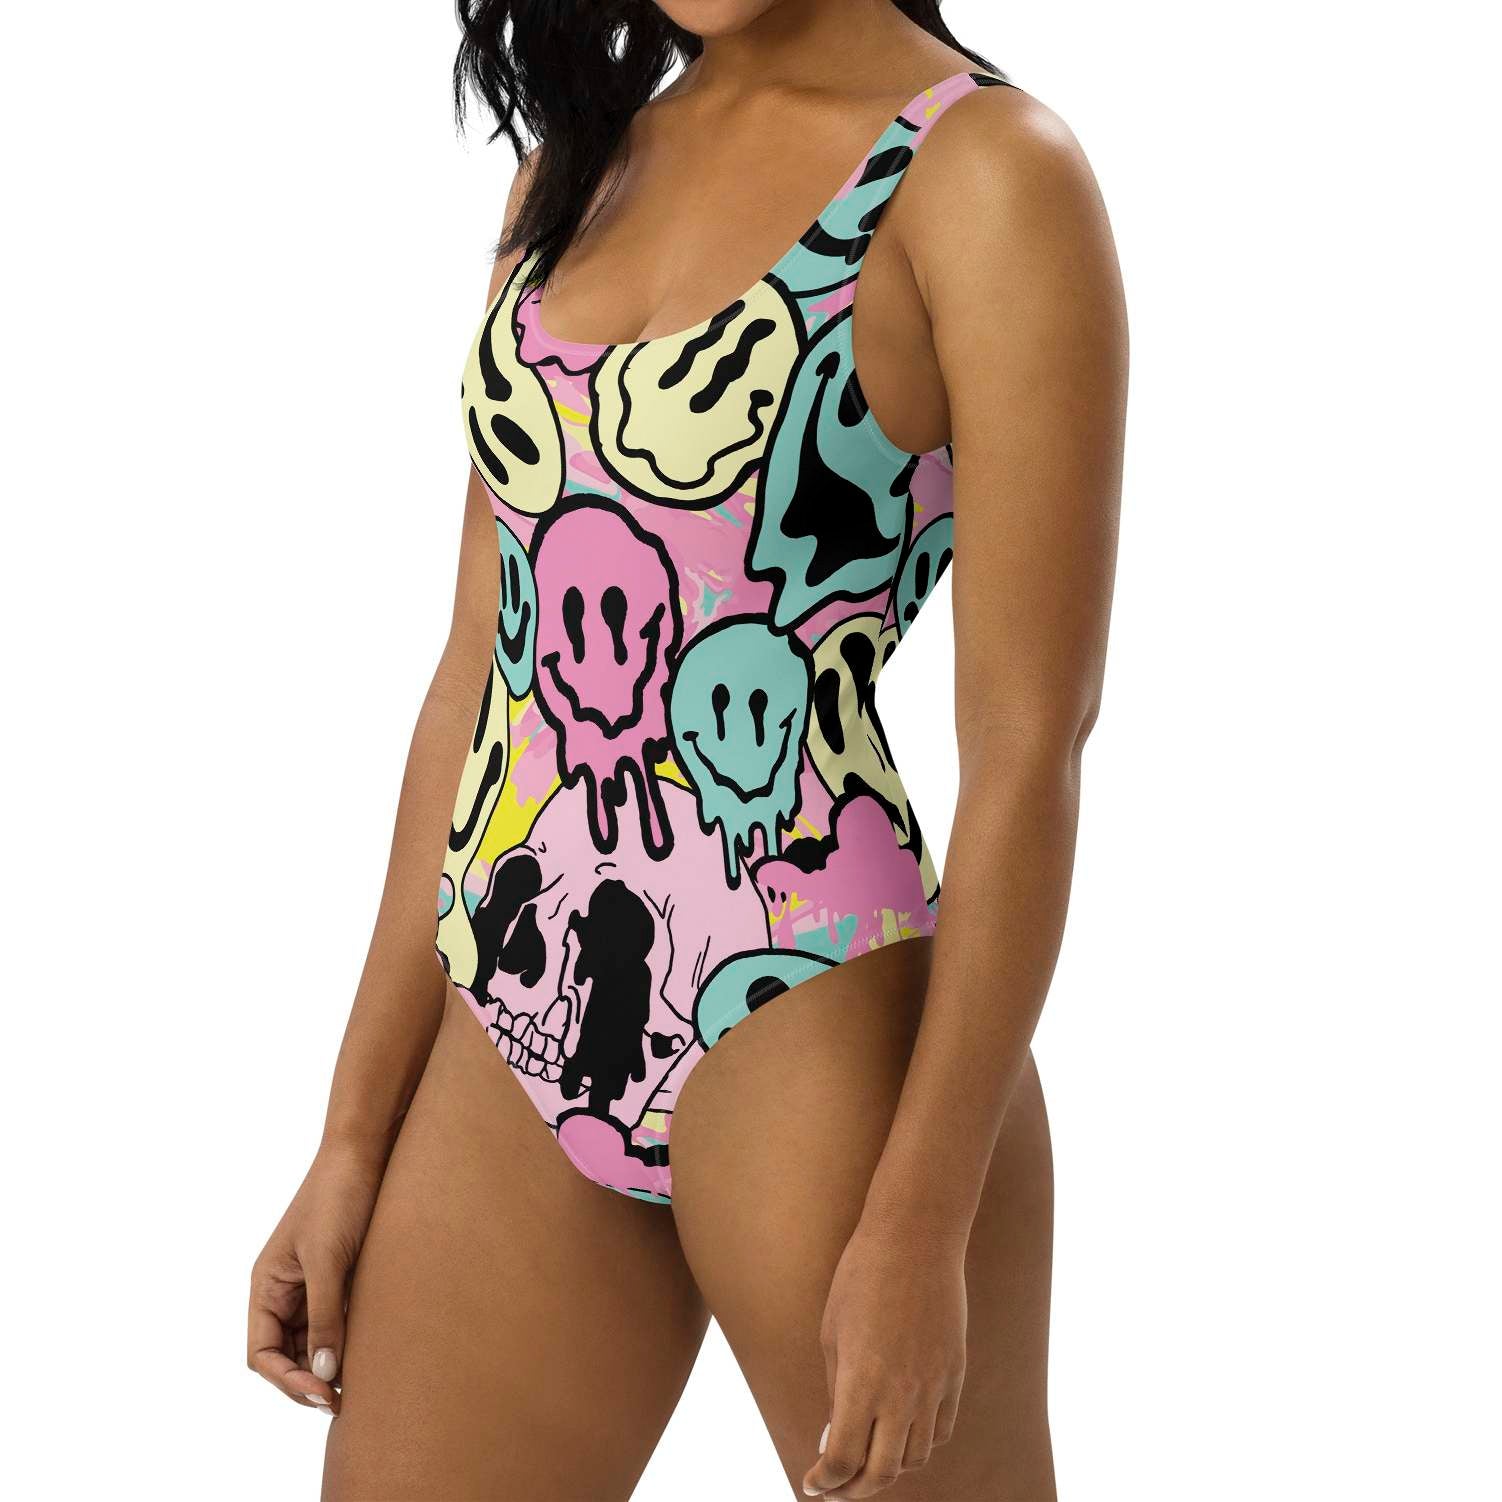 Pastel Melted Neon Smiley Print One-Piece Swimsuit